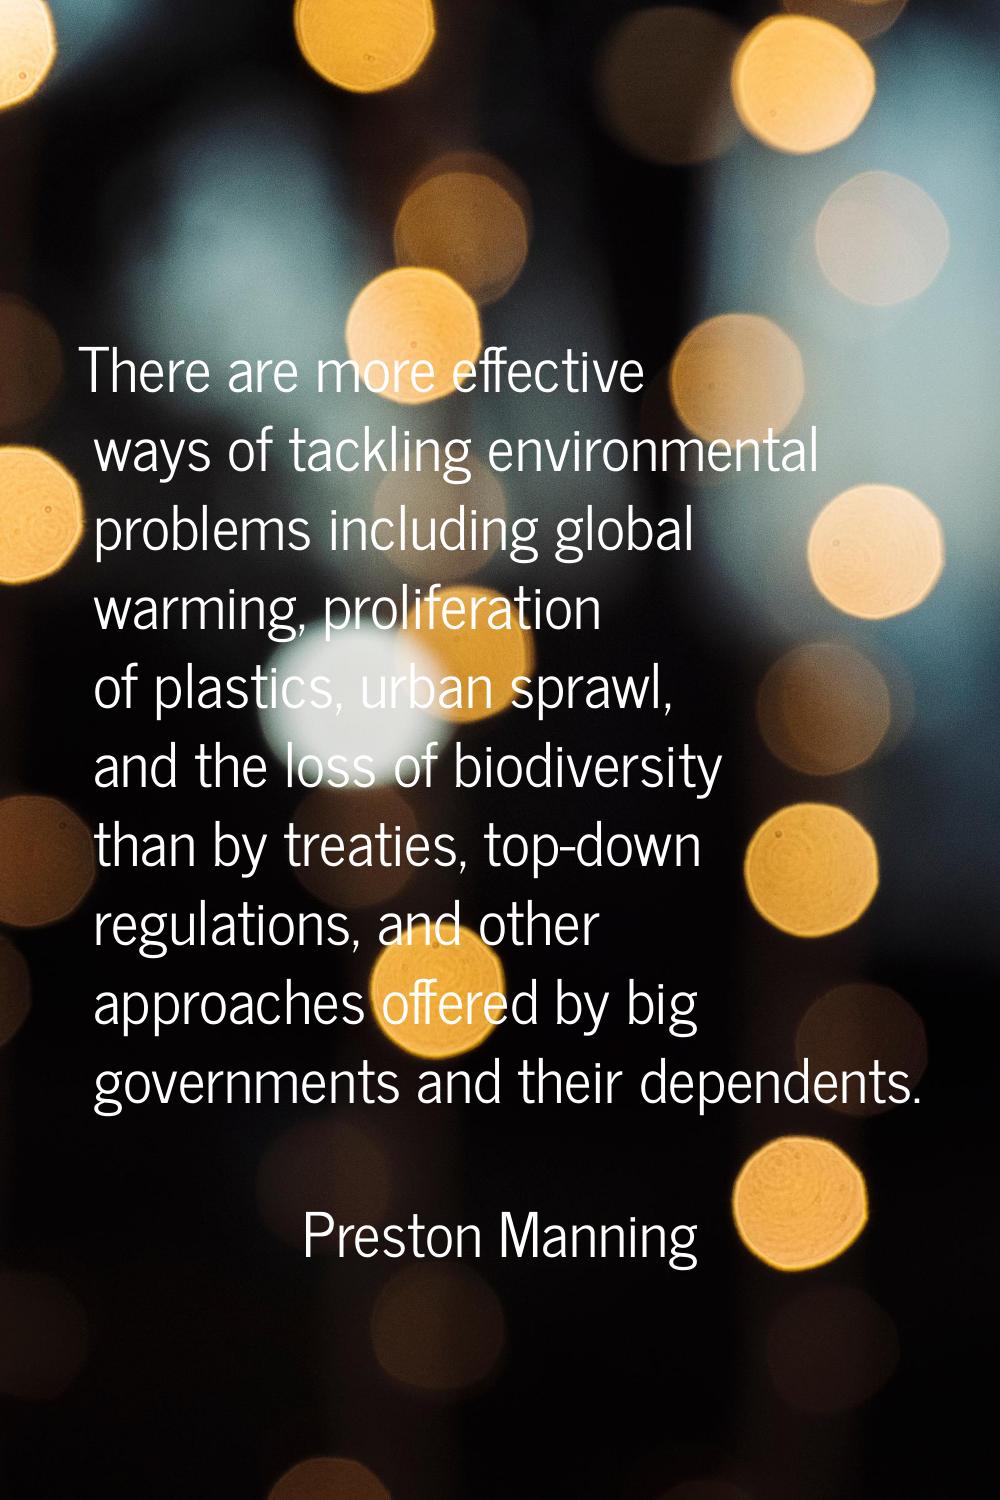 There are more effective ways of tackling environmental problems including global warming, prolifer